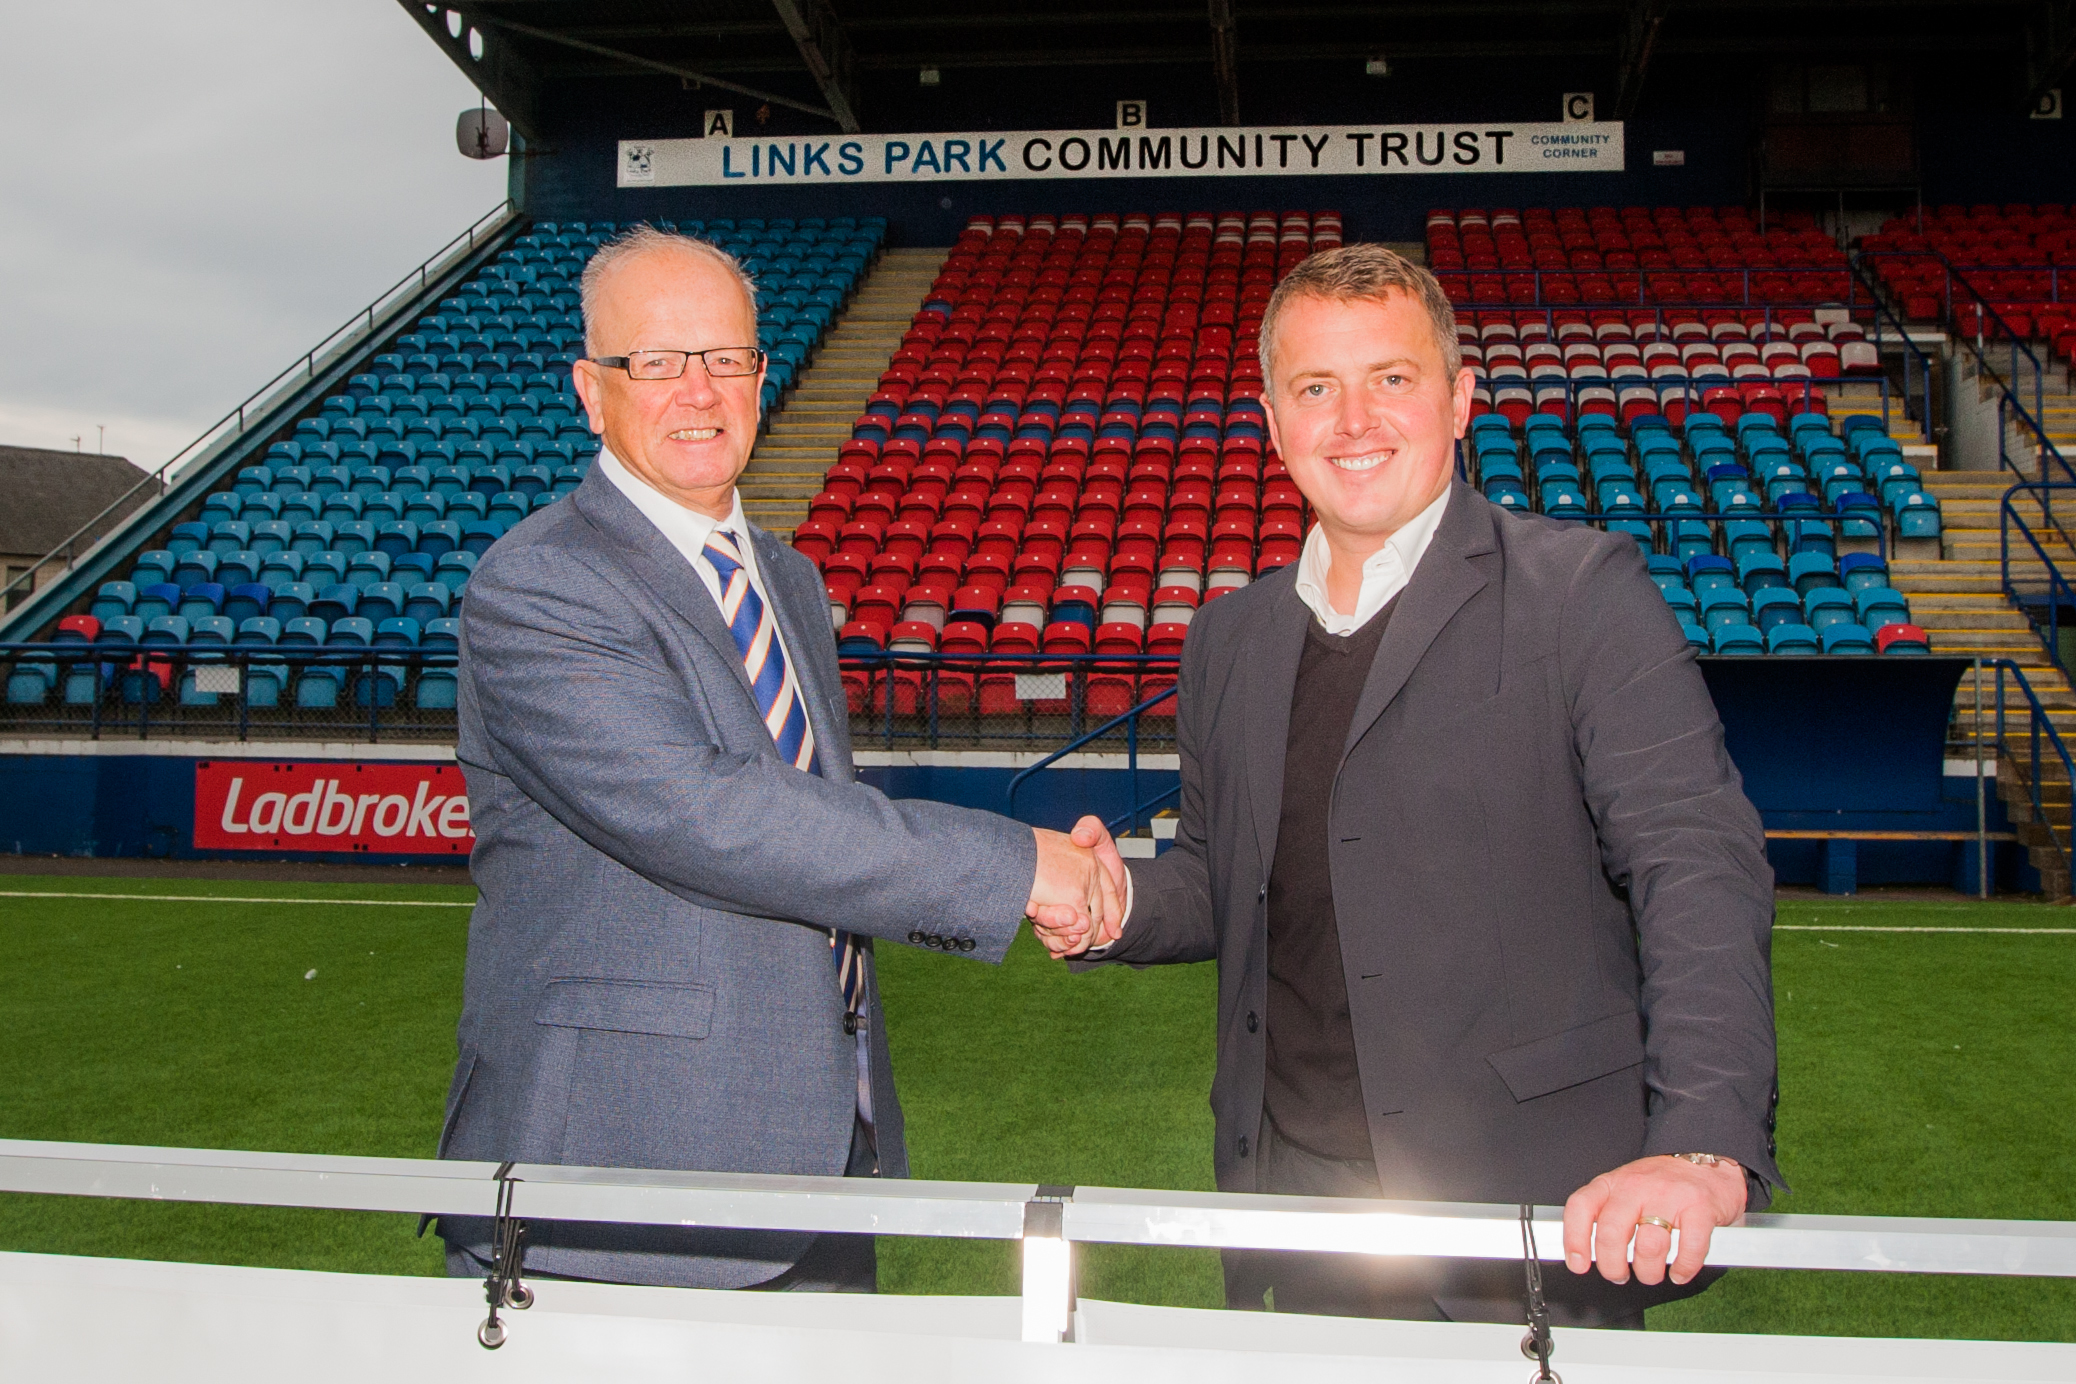 Picture shows club chairman John Crawford (left) and Peter Davidson (LPCT Chief Executive, right).